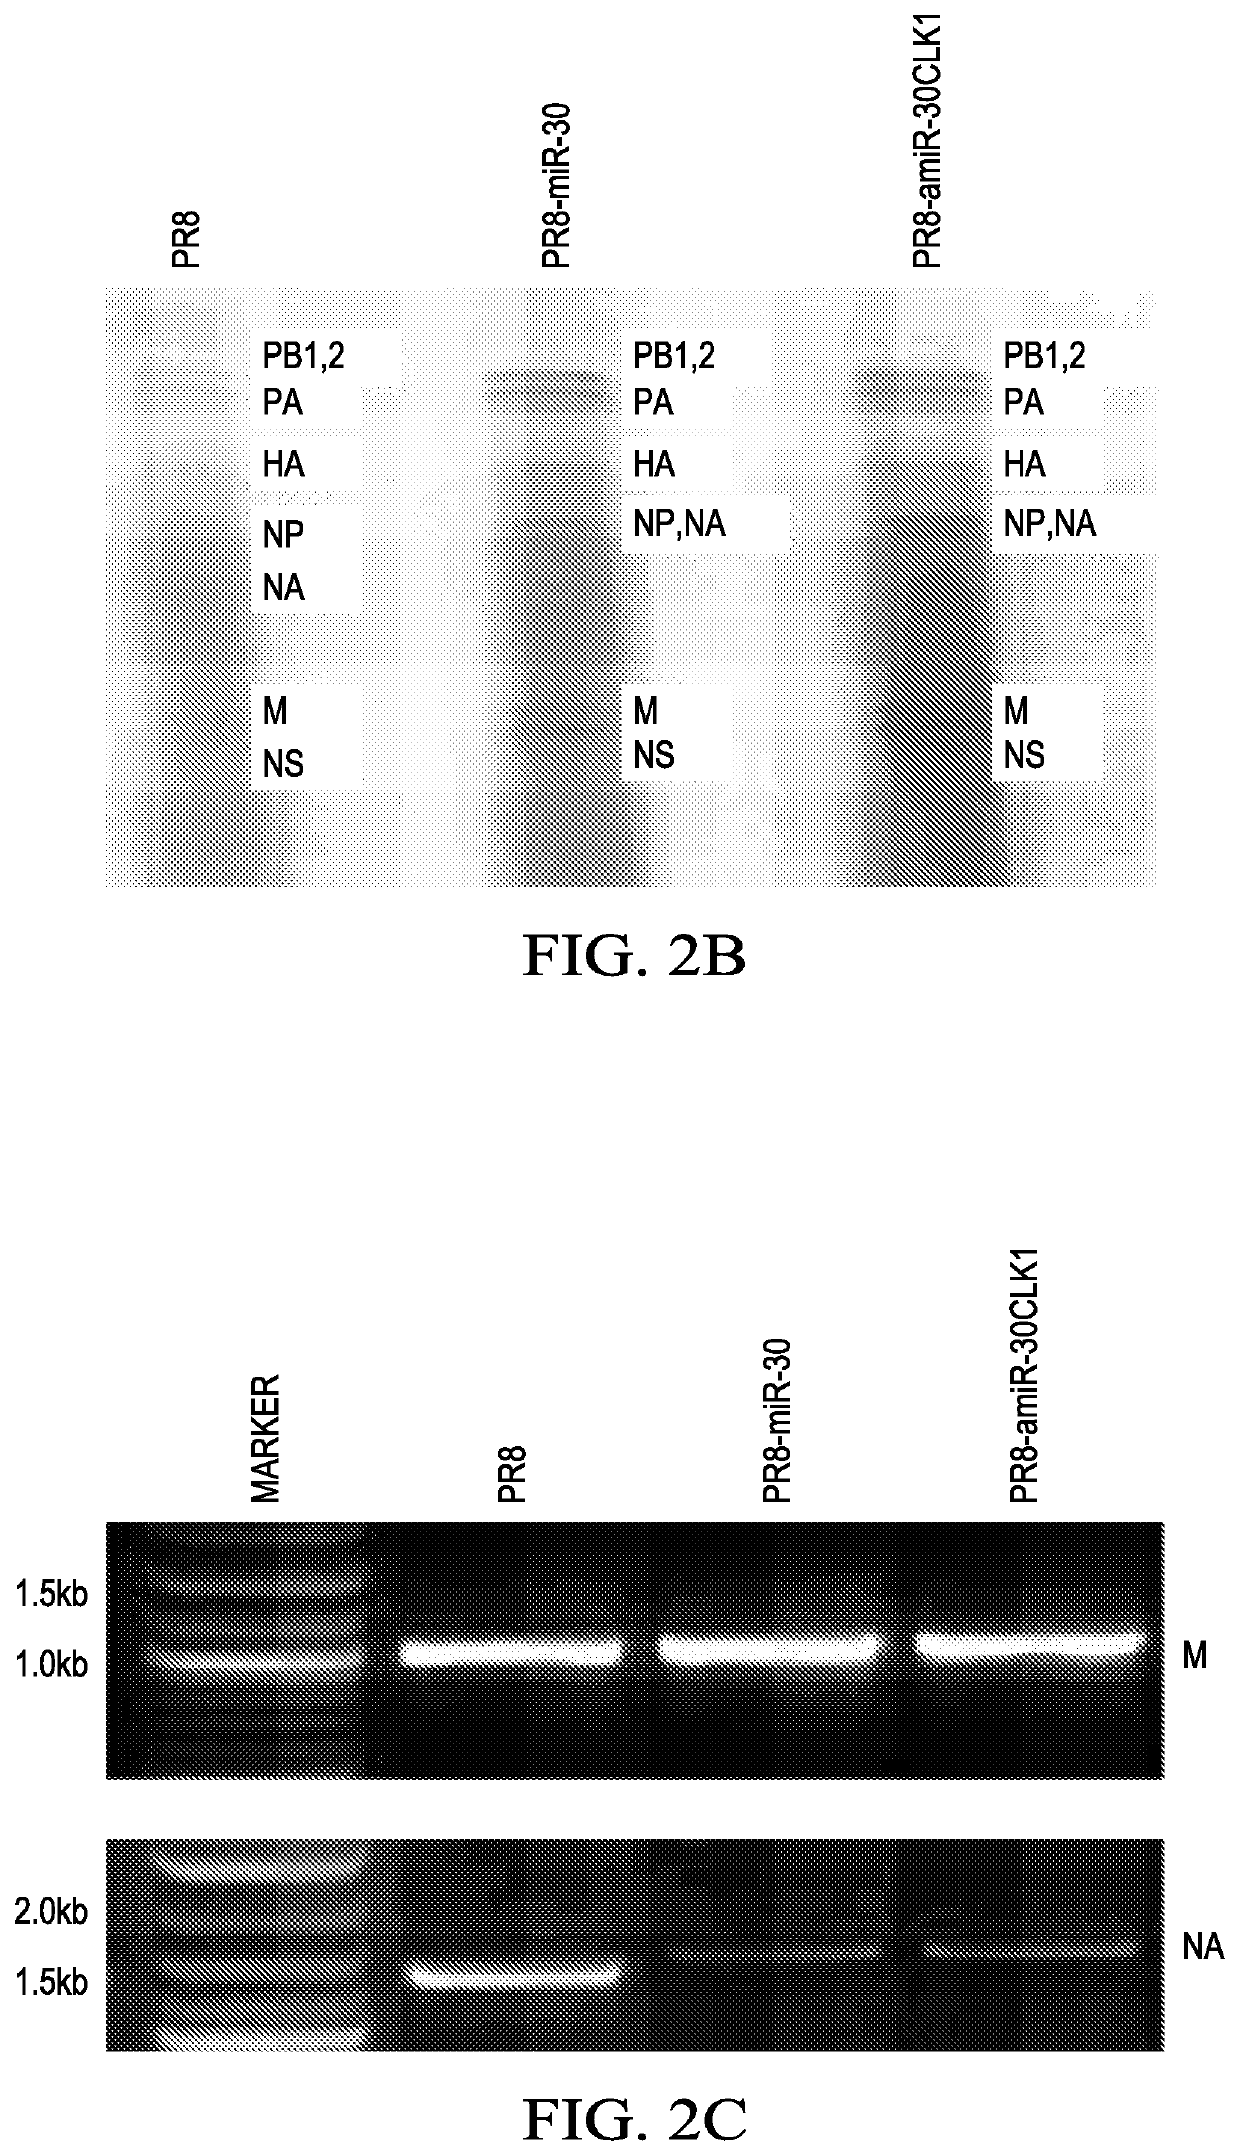 Self-attenuated prophylactic and therapeutic vaccines against pathogens